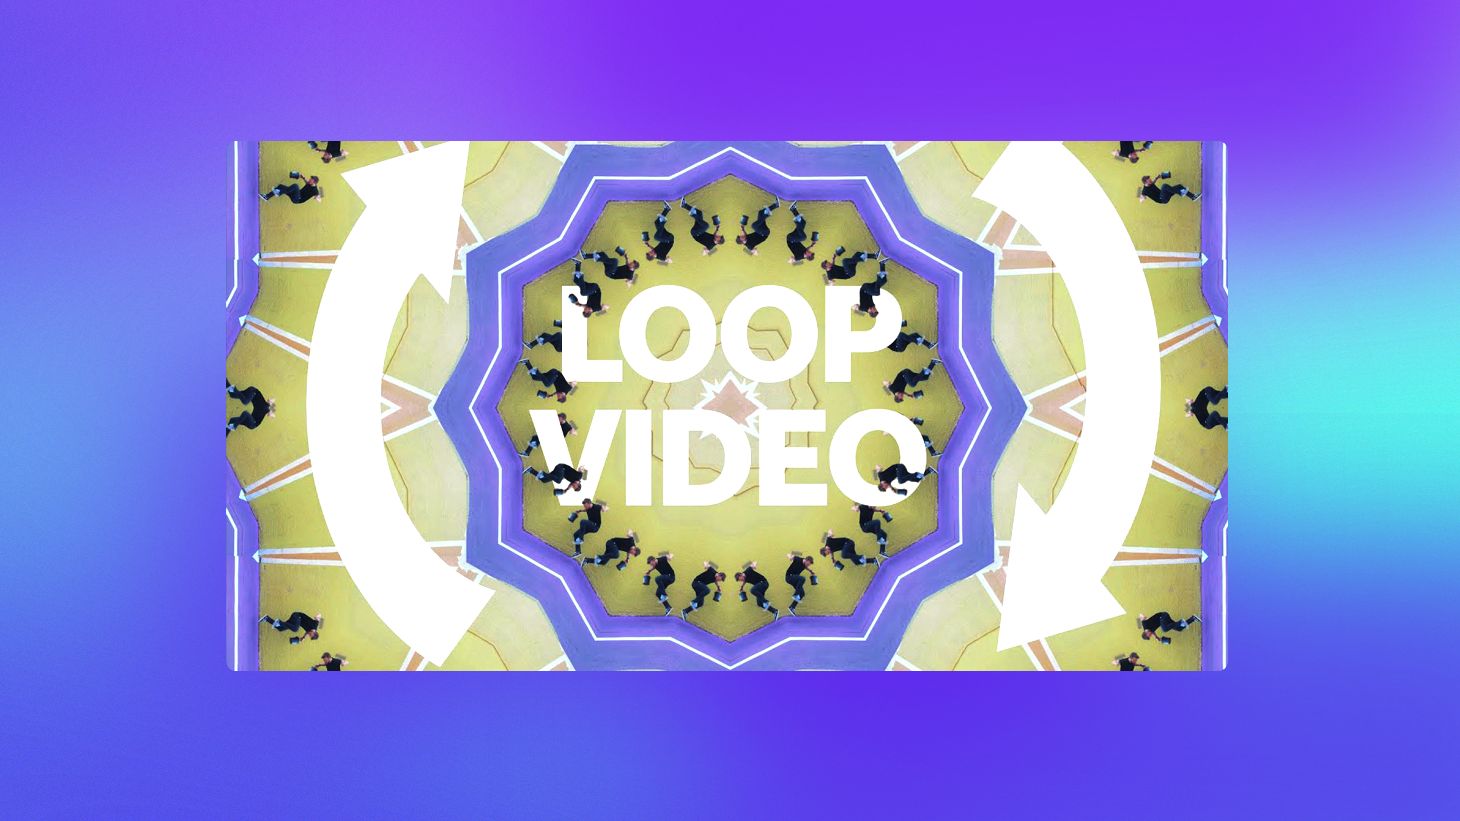 How To Loop  Videos 2023? Repeat  Videos Automatically 